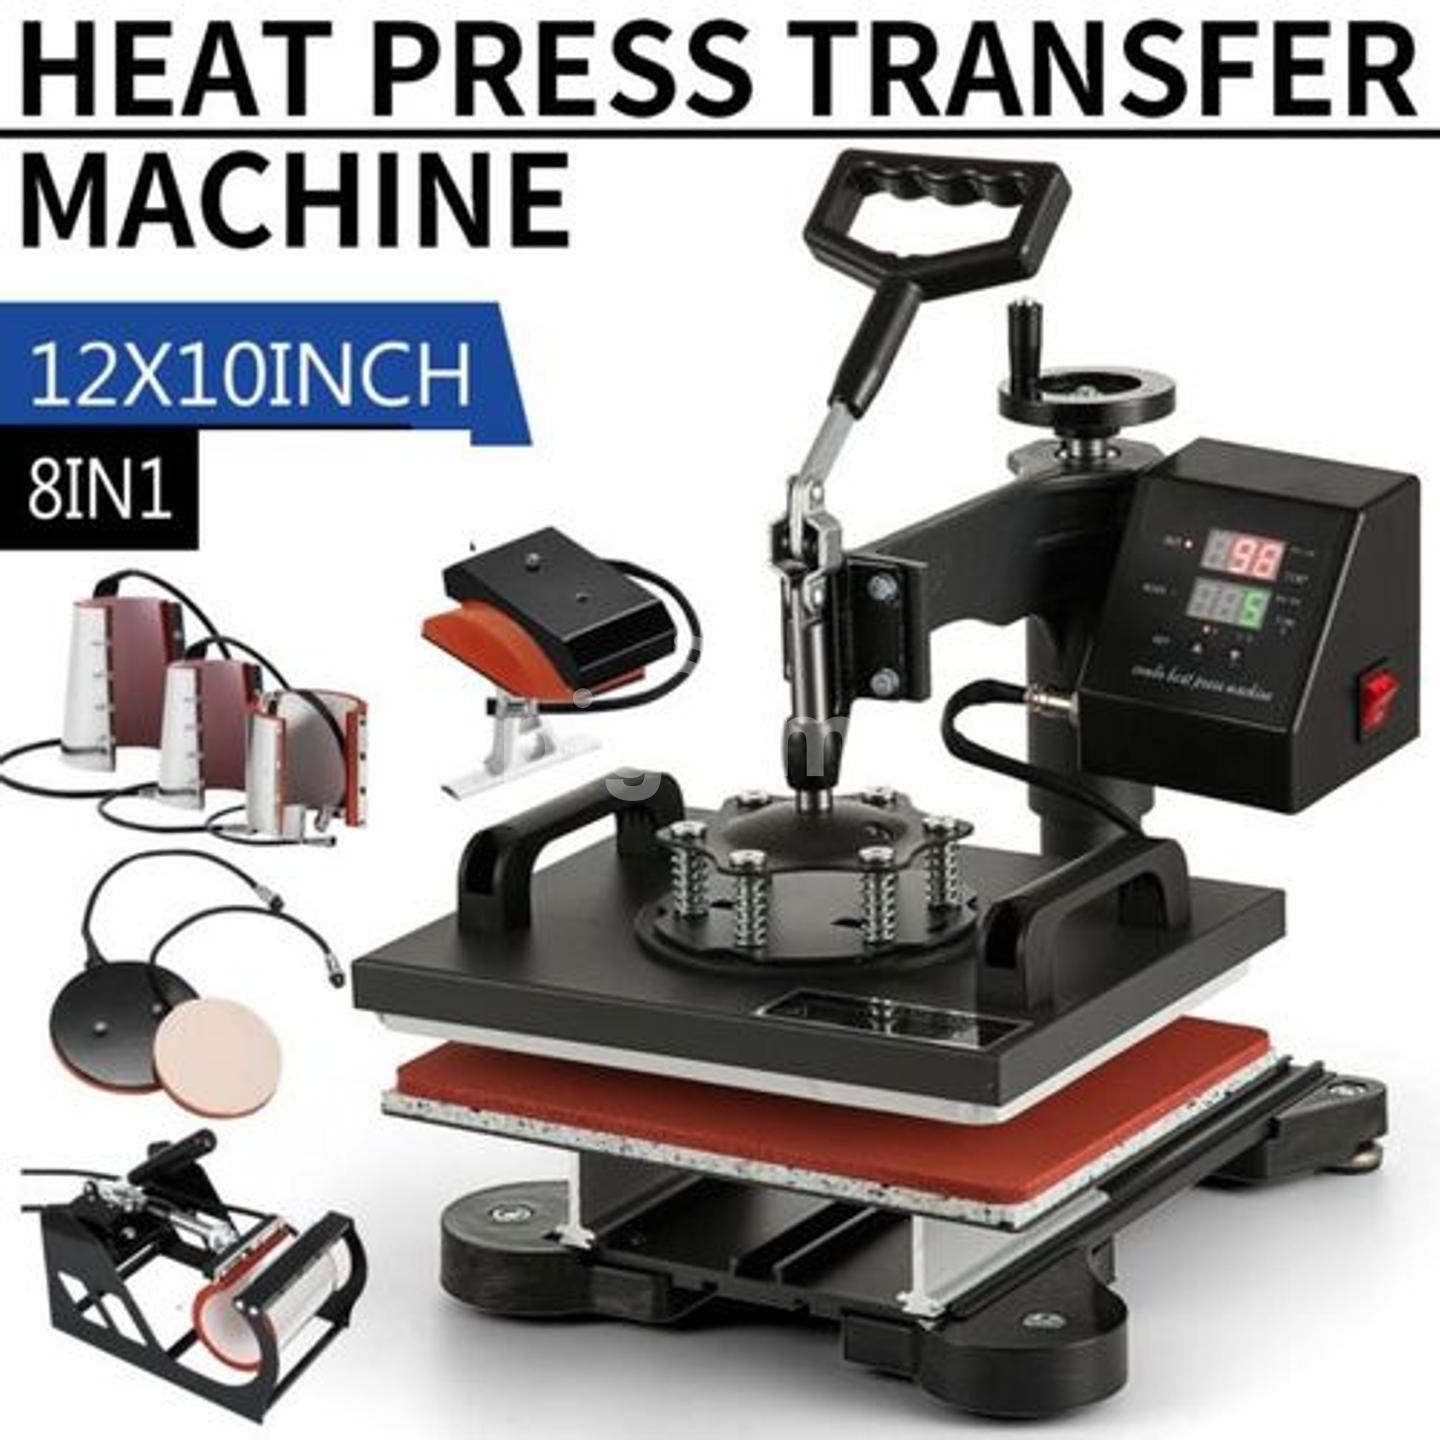  8 in 1 Heat Press Machine for t Shirts Professional